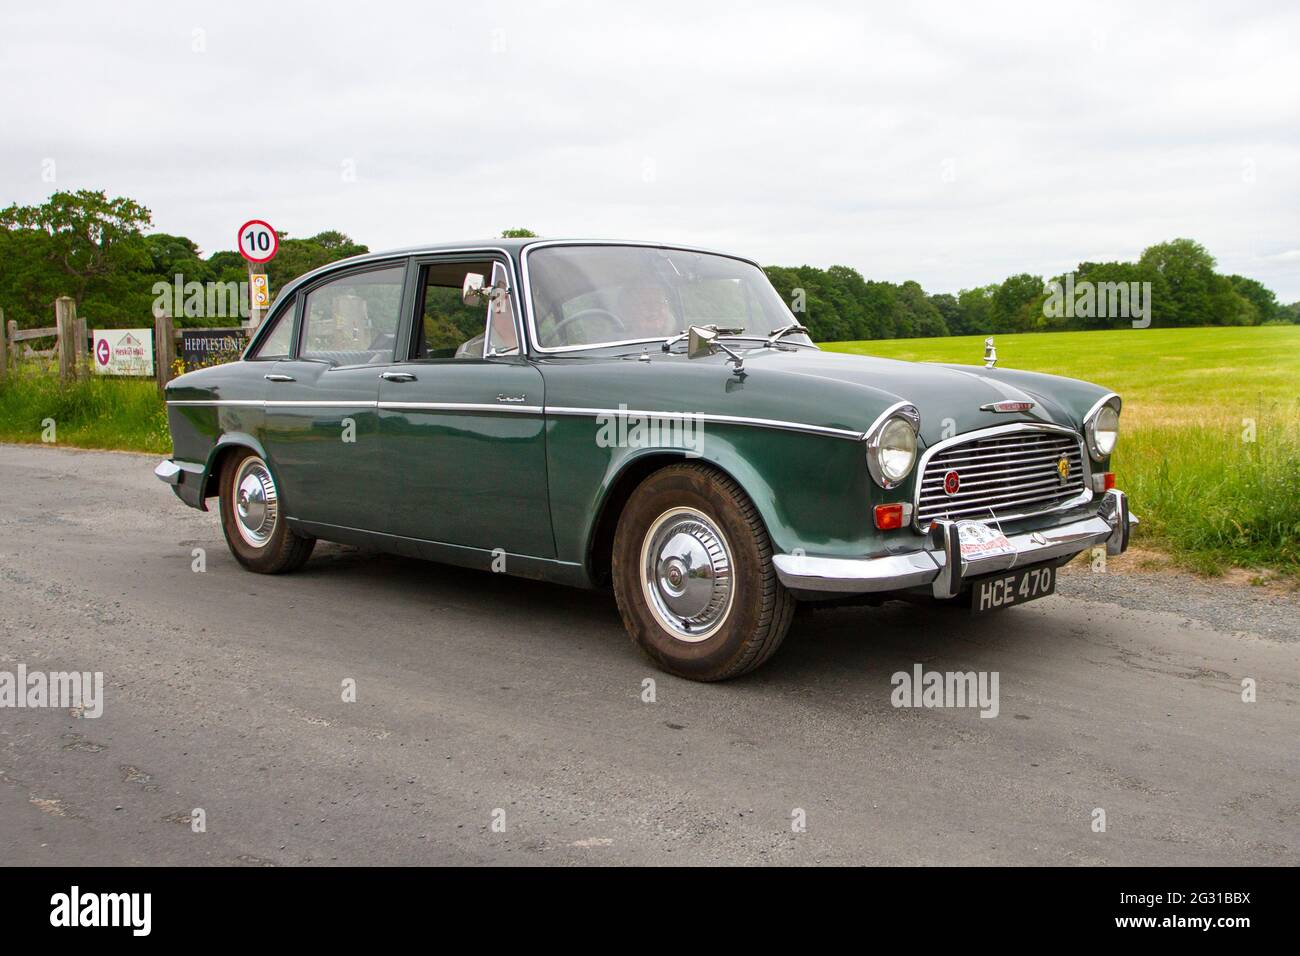 1967 60s Humber Hawk green 2267cc petrol 4dr saloon travelling to classic and vintage car show at Heskin Hall, Lancashire, UK Stock Photo